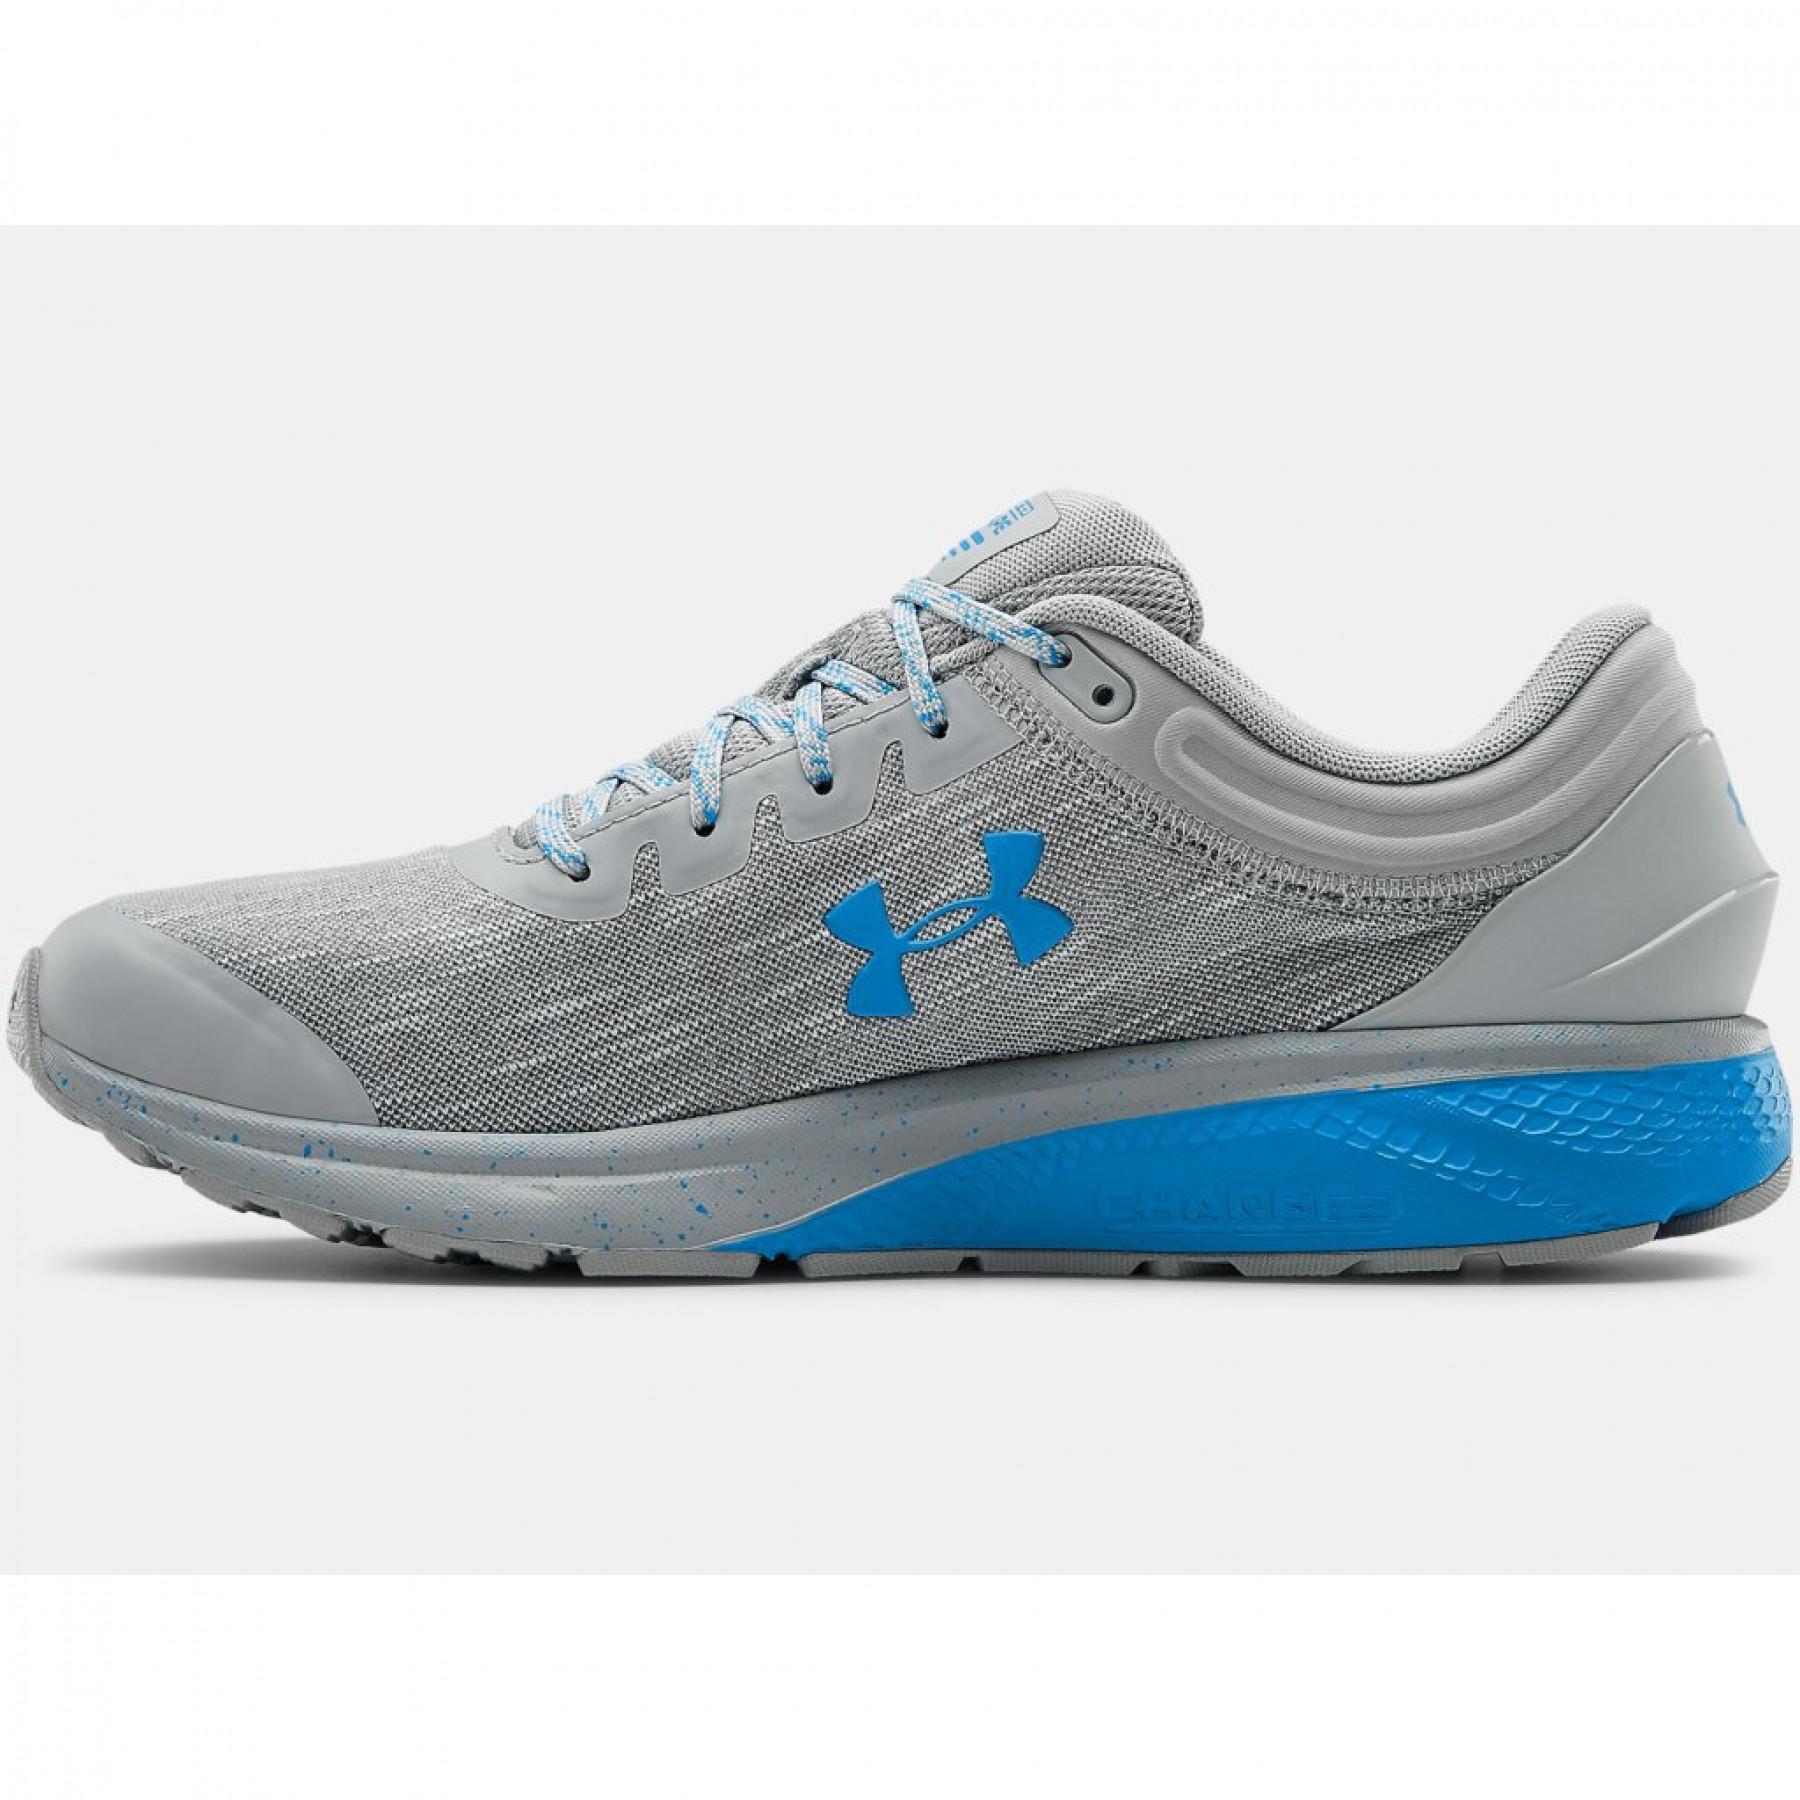 Shoes Under Armour Charged Escape 3 Evo